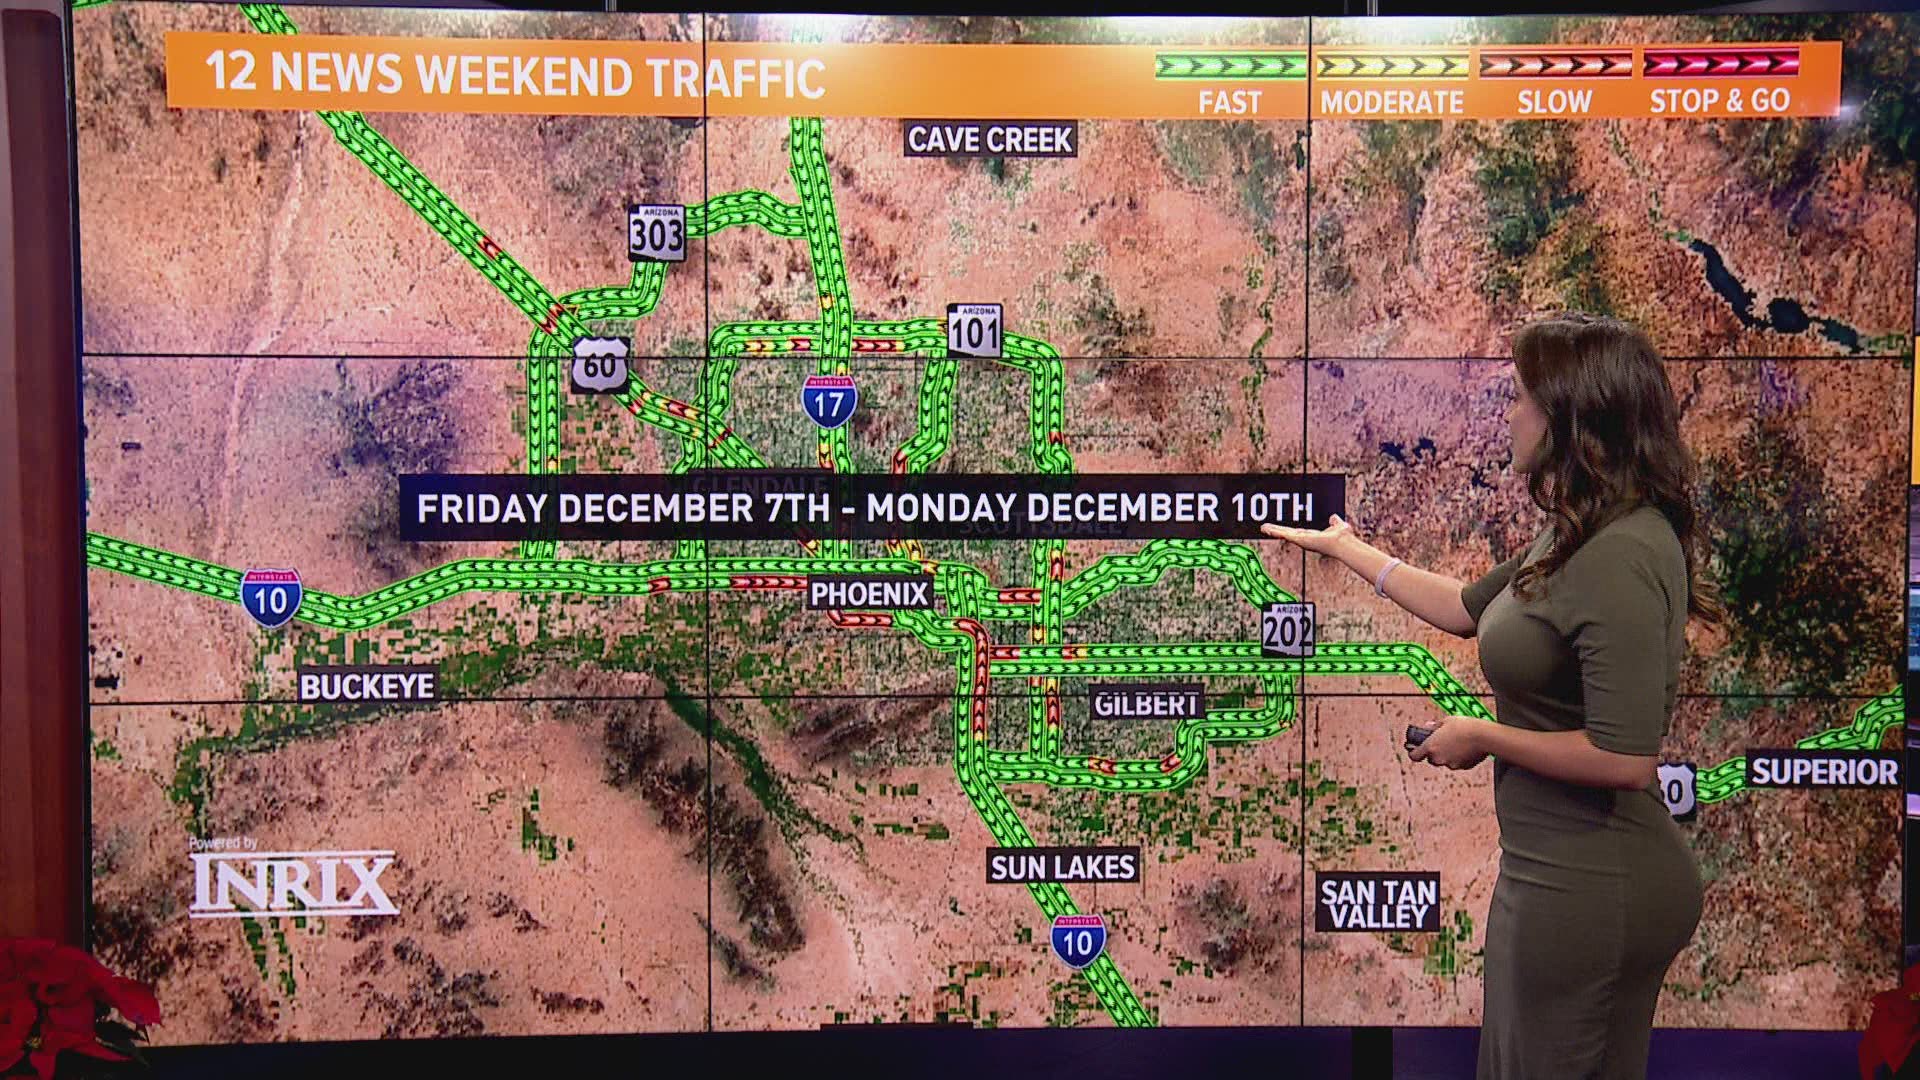 Here's the weekend traffic outlook for Dec. 7 - Dec. 10.